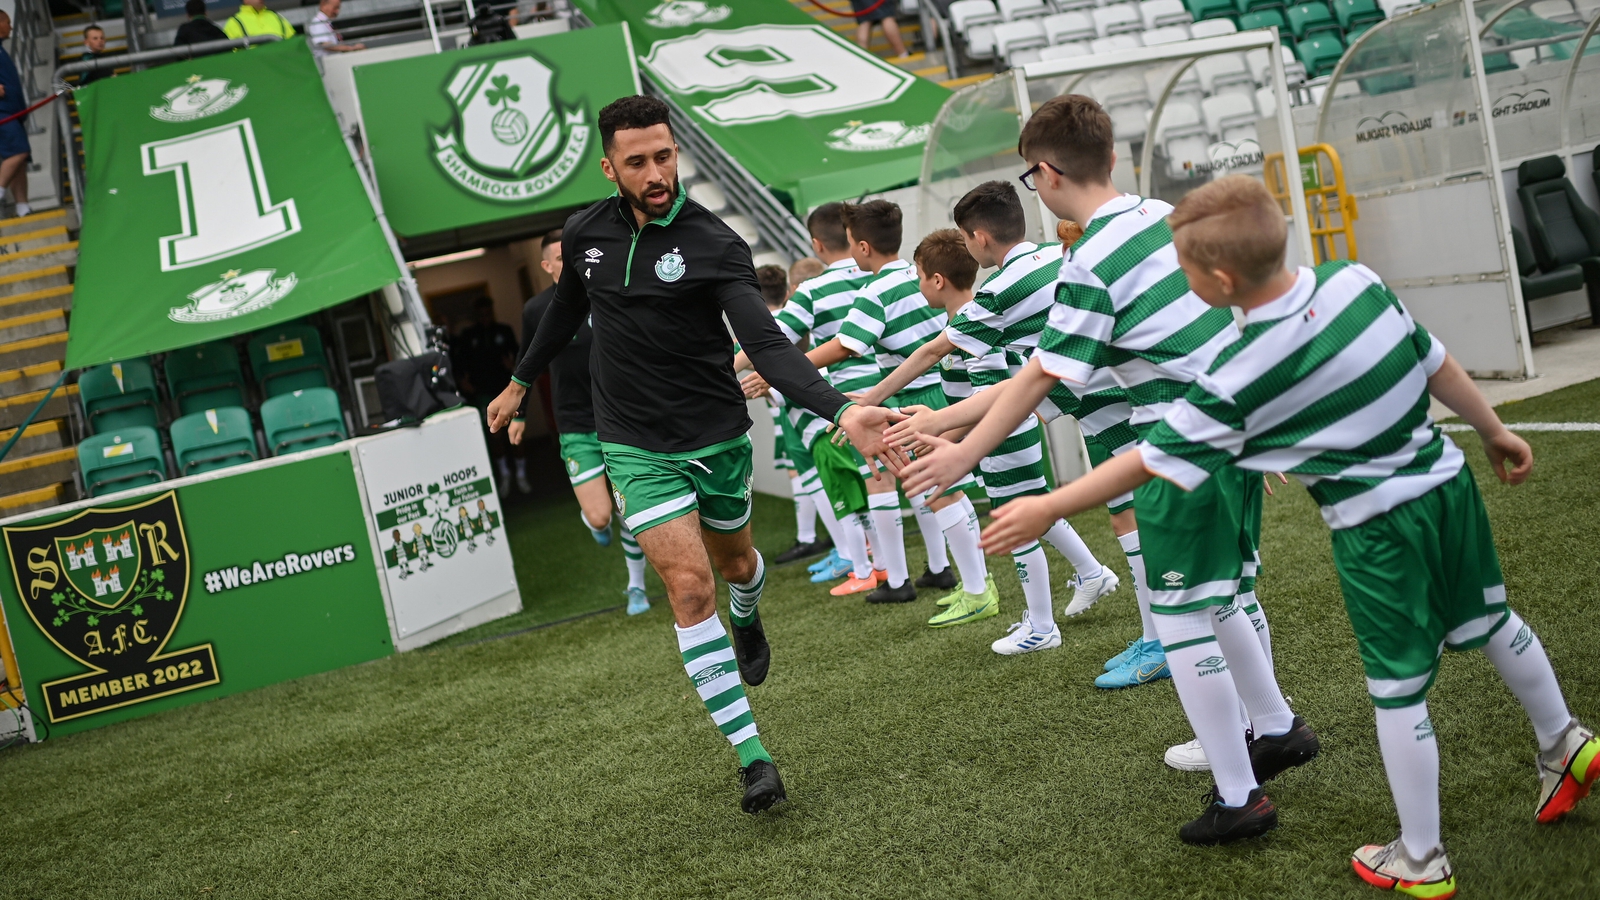 Shamrock Rovers v Hibernians: All you need to know